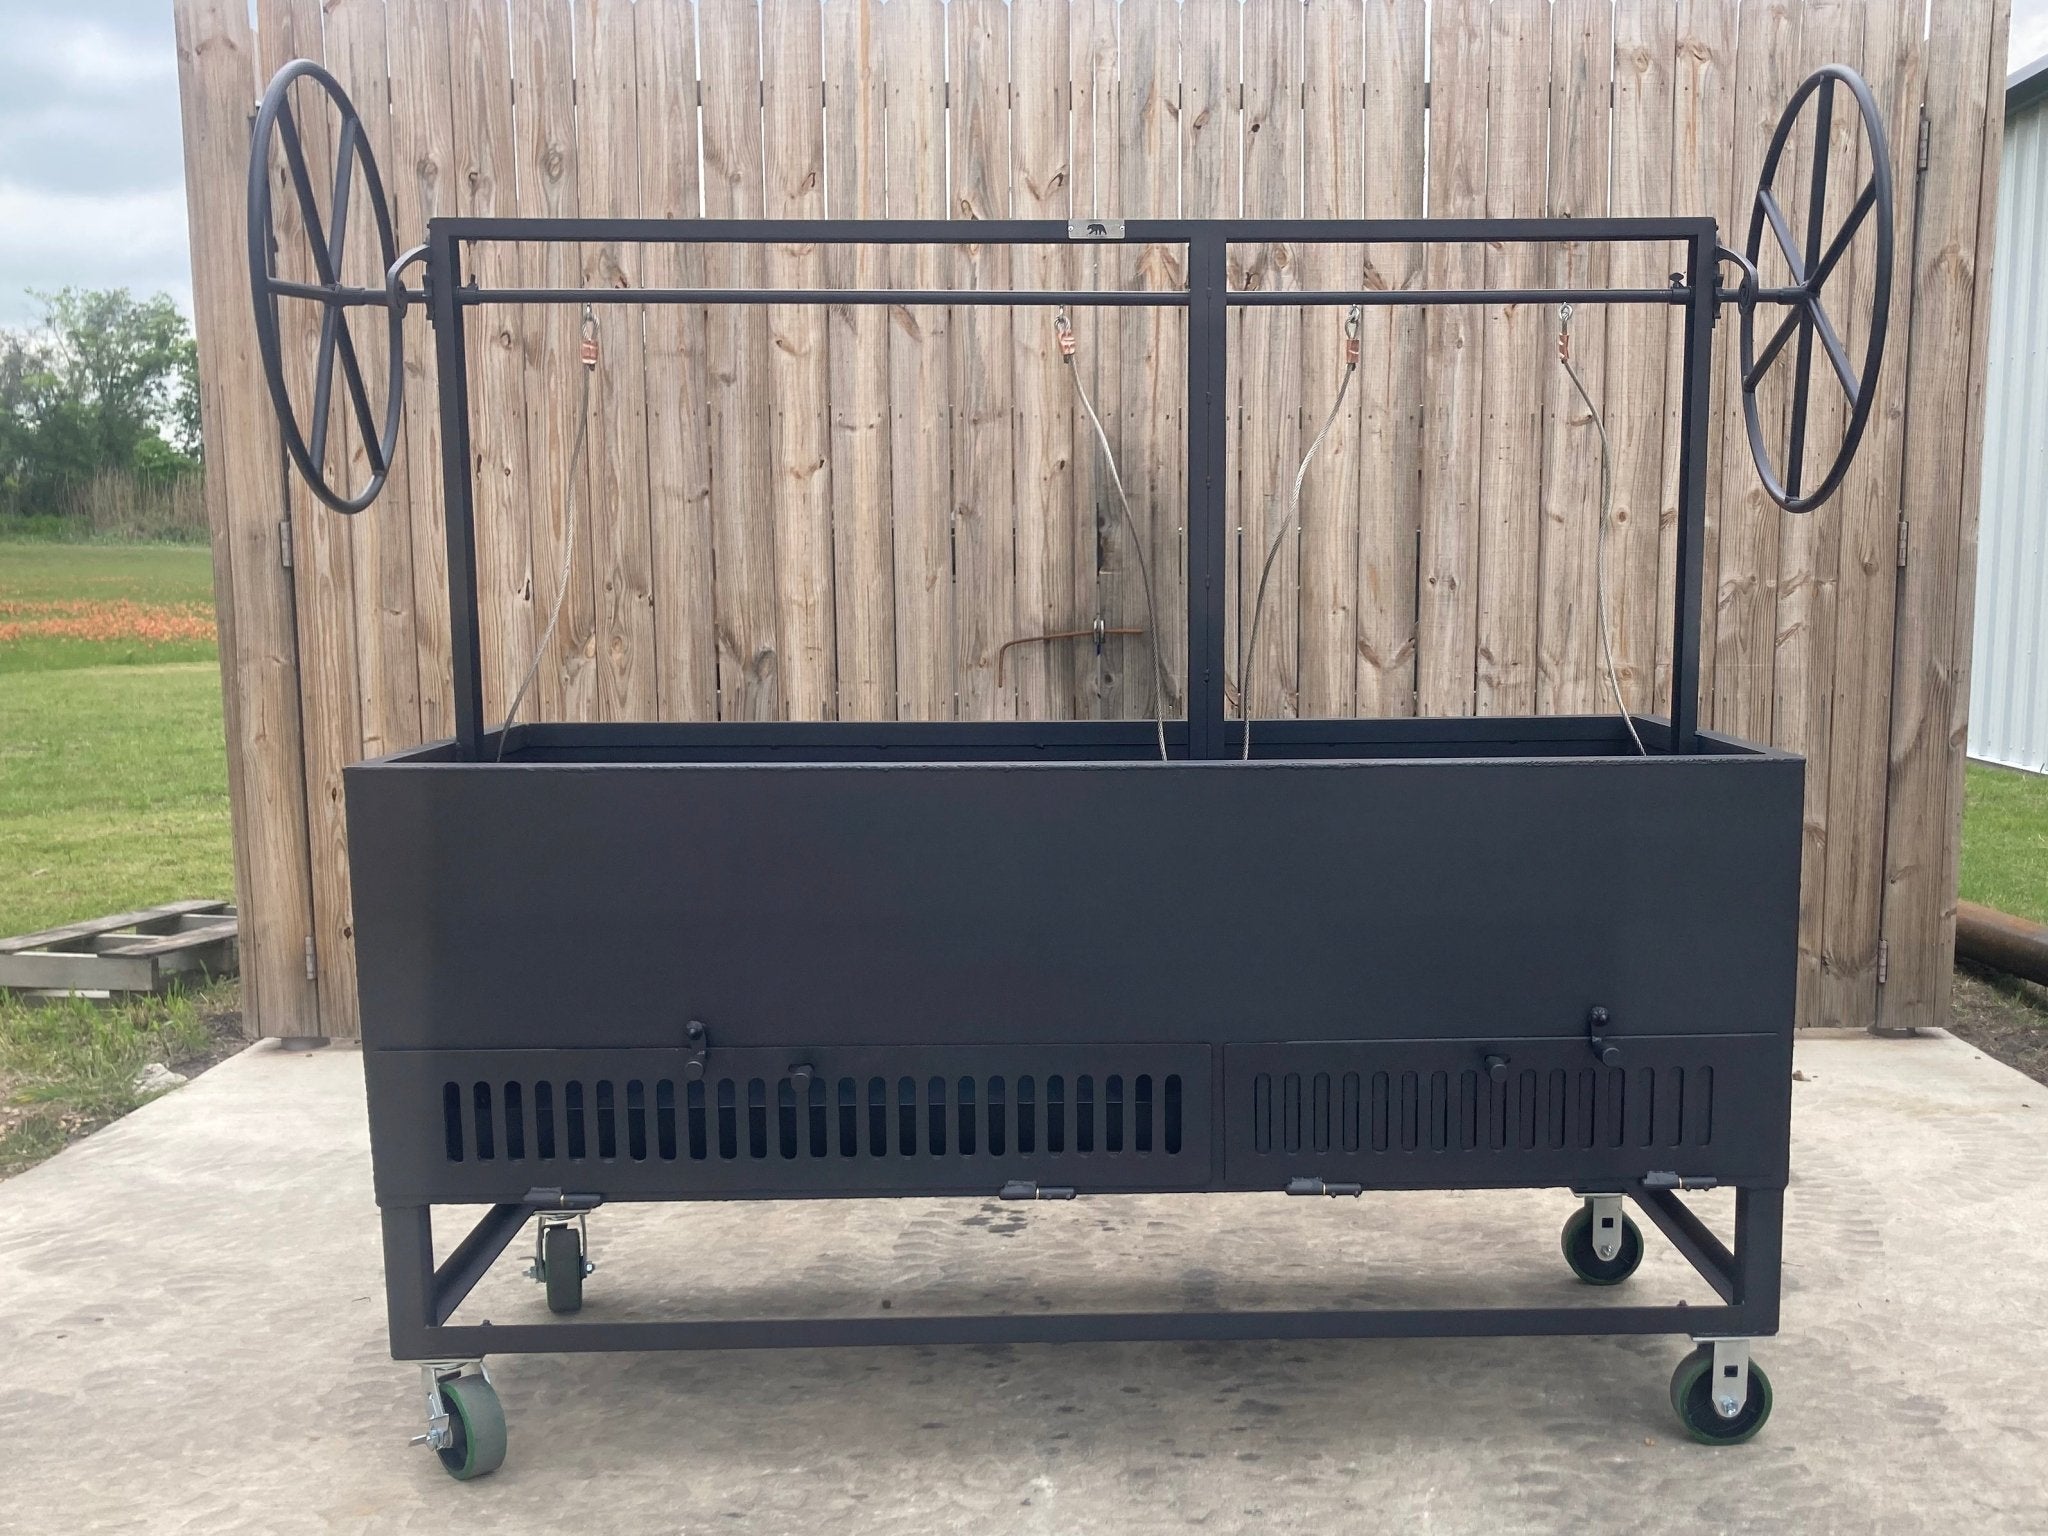 COMMERCIAL and Custom BBQ Grills